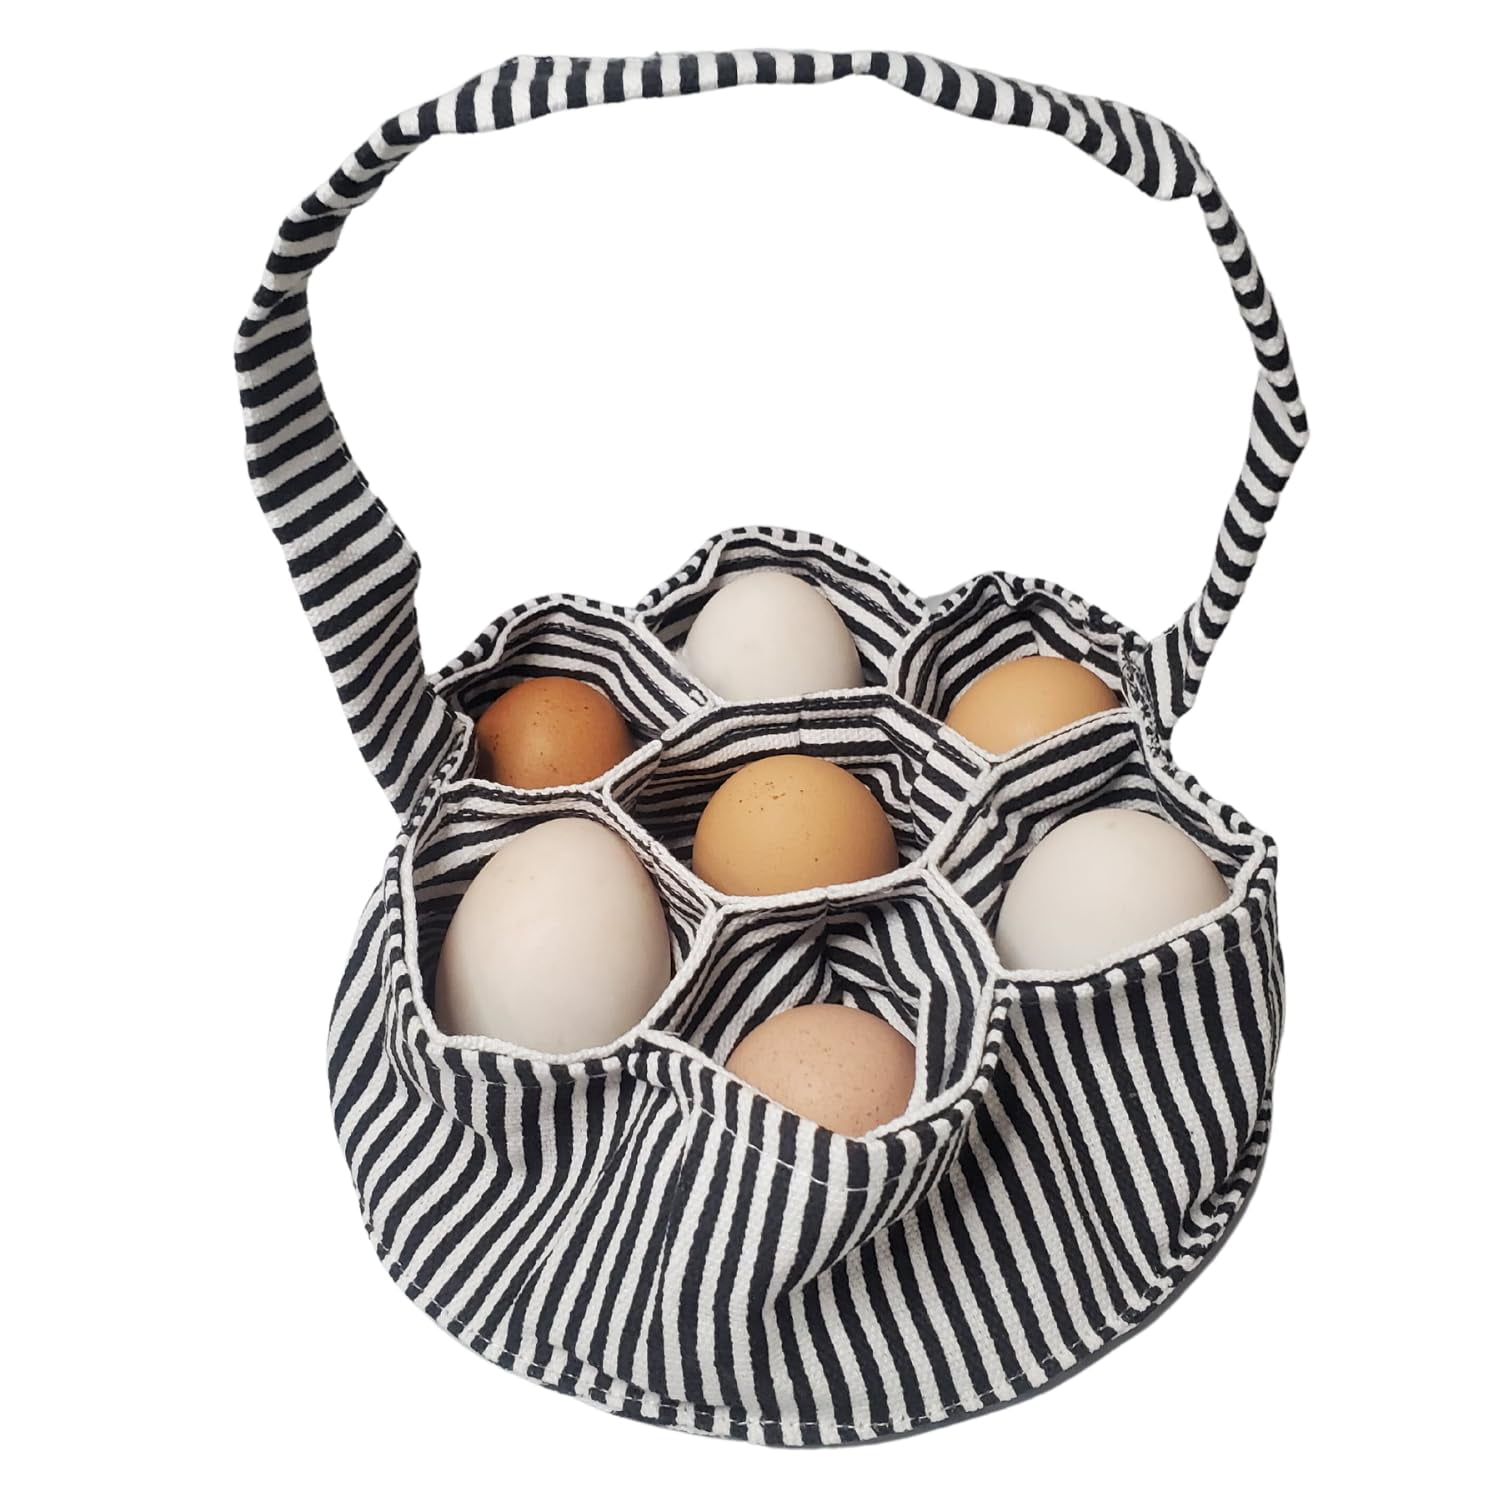 Mini Fabric Egg Basket for Collecting Eggs - 1 Egg Collecting Basket With 7  Pouches for Chicken, Duck and Quail Eggs - Striped Farmhouse Egg Basket  with Handle for Adults and Kids